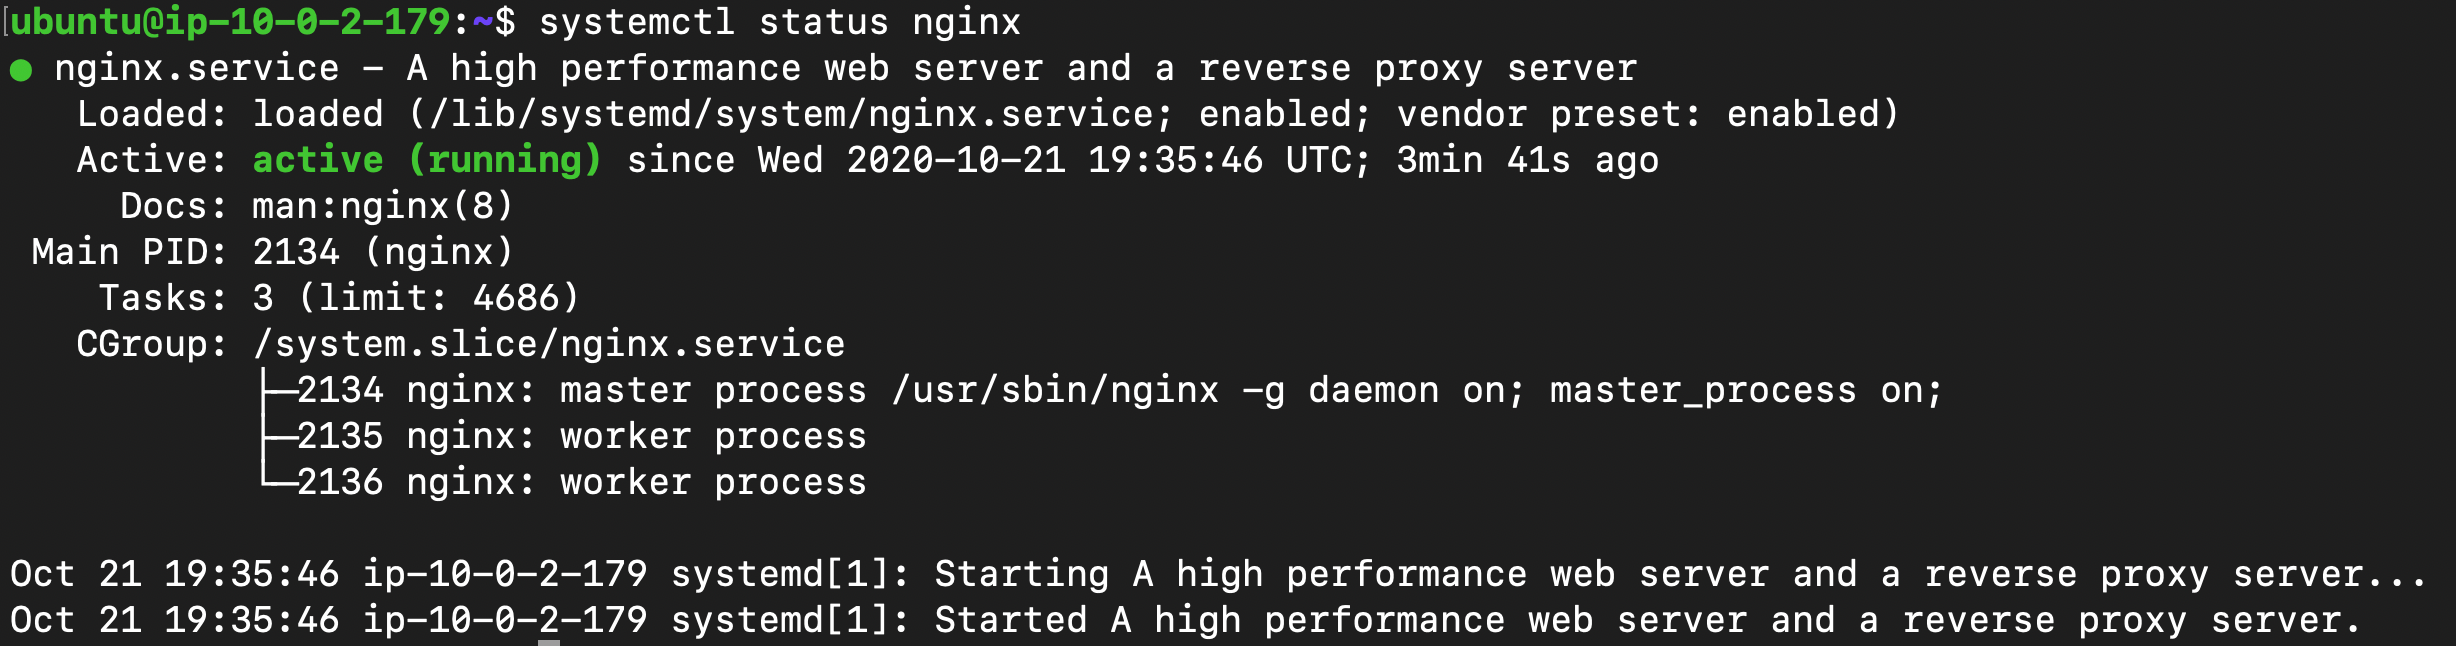 Nginx is up and running